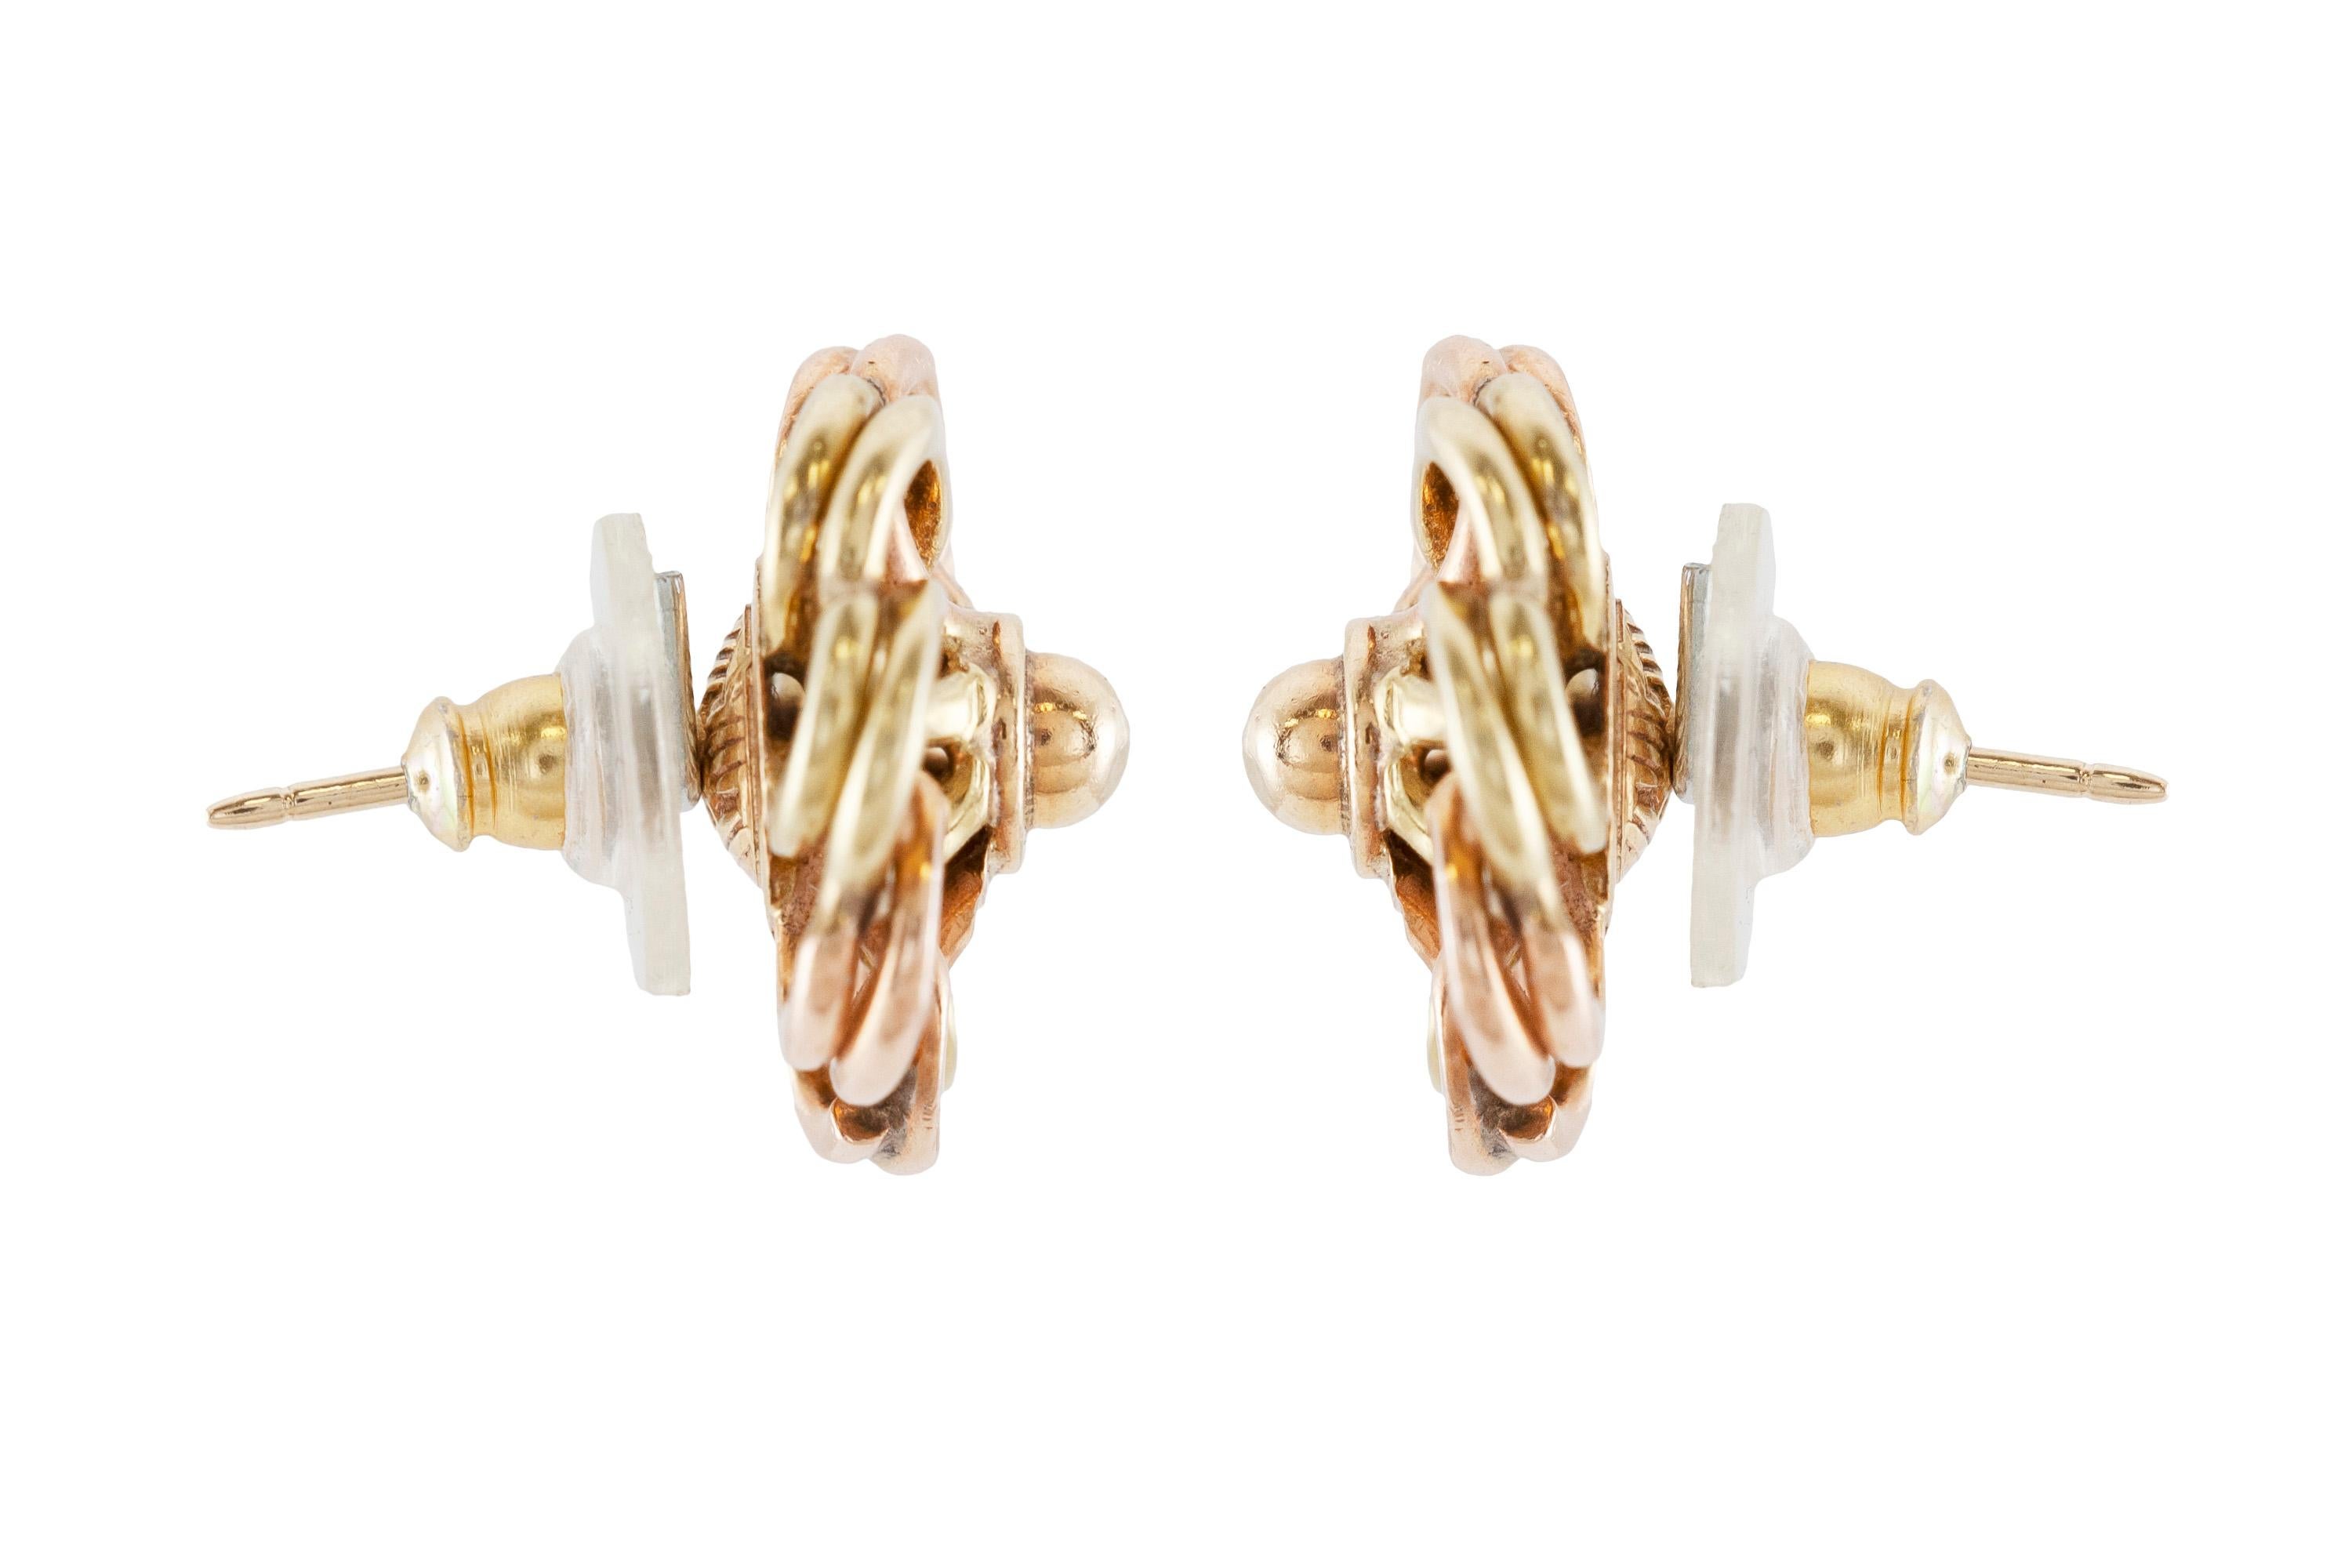 The earrings are finely crafted in 14k yellow and rose gold, weighing 8.1 dwt. 
Circa 1940.